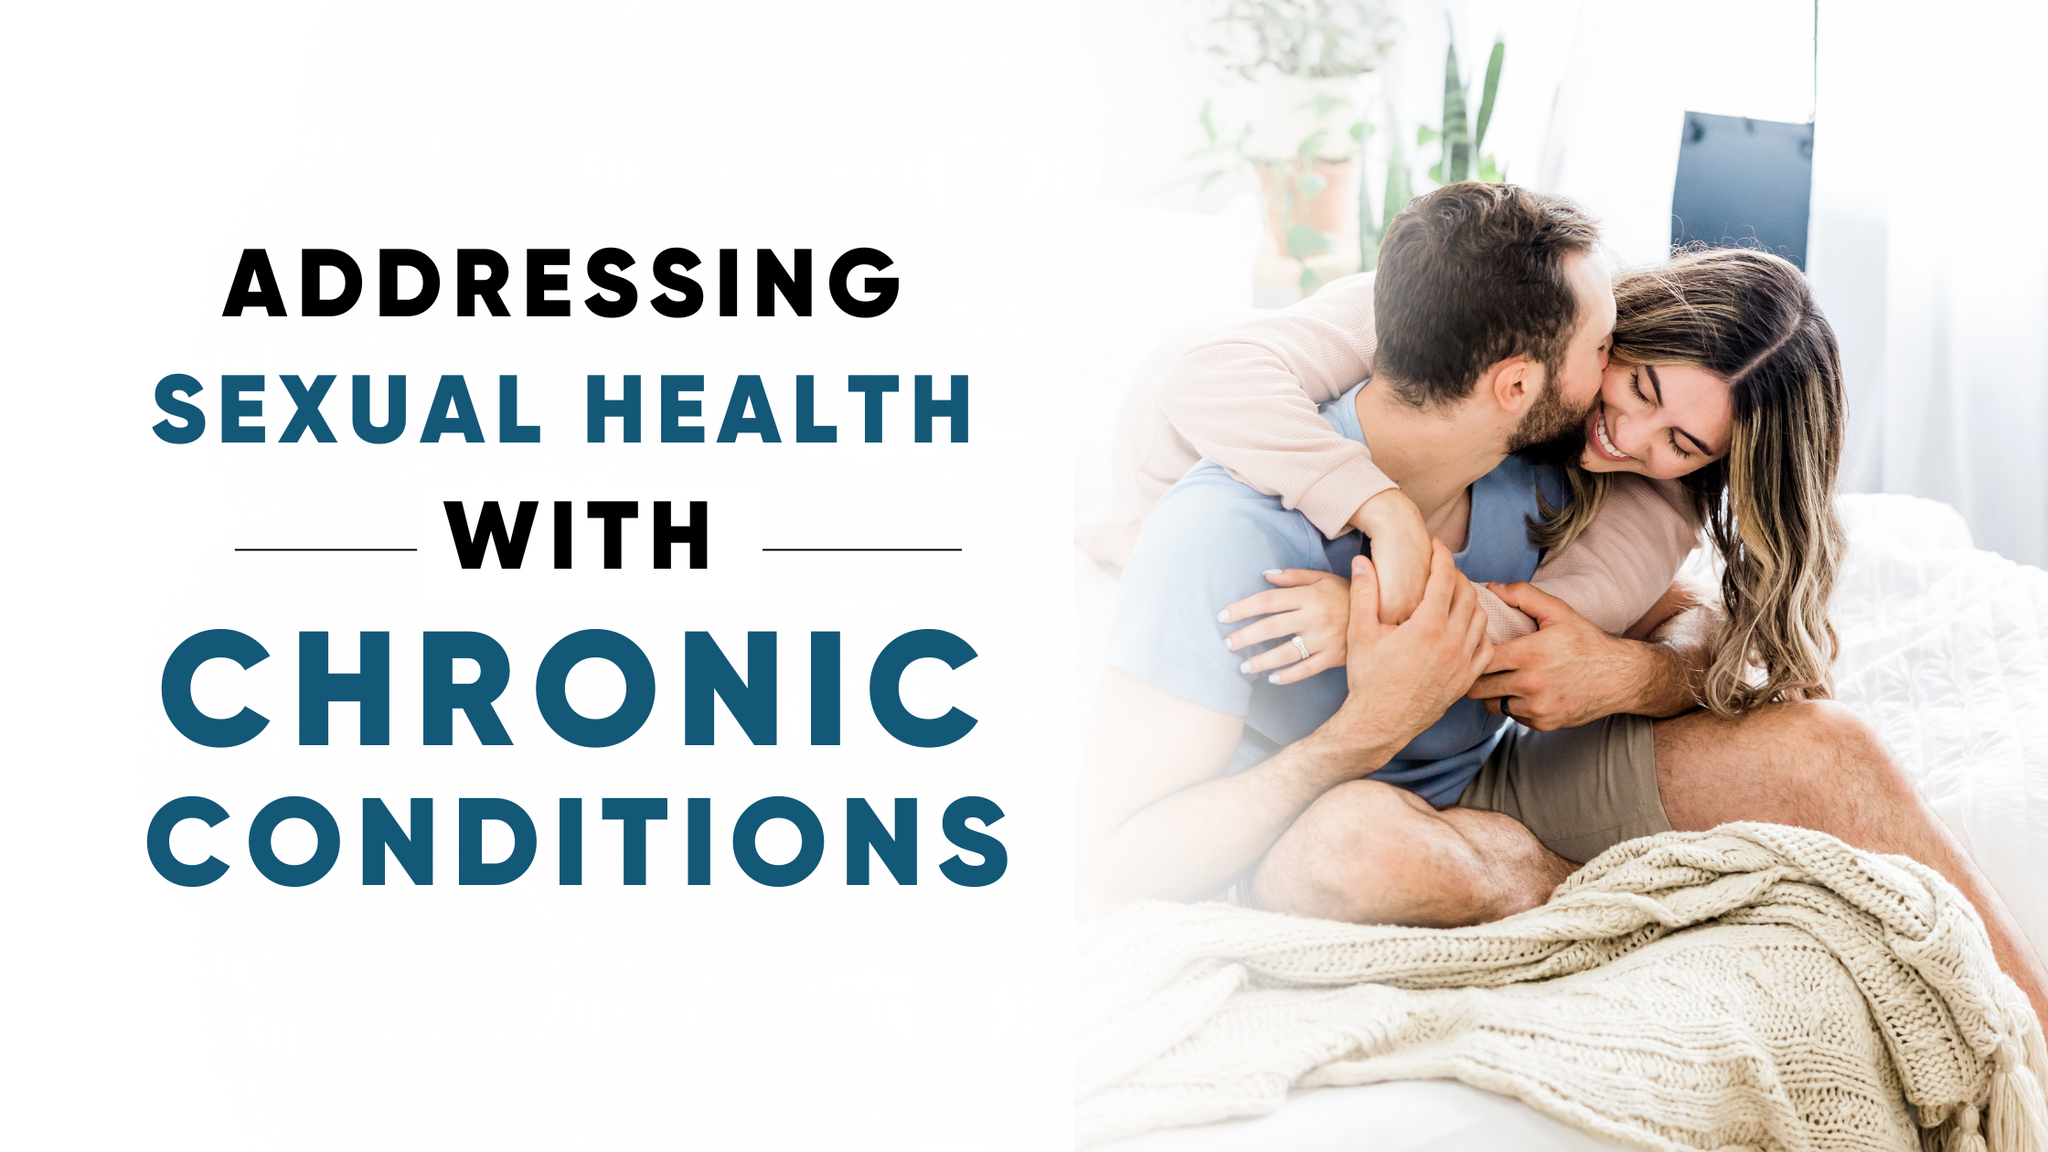 ADDRESSING SEXUAL HEALTH WITH CHRONIC CONDITIONS